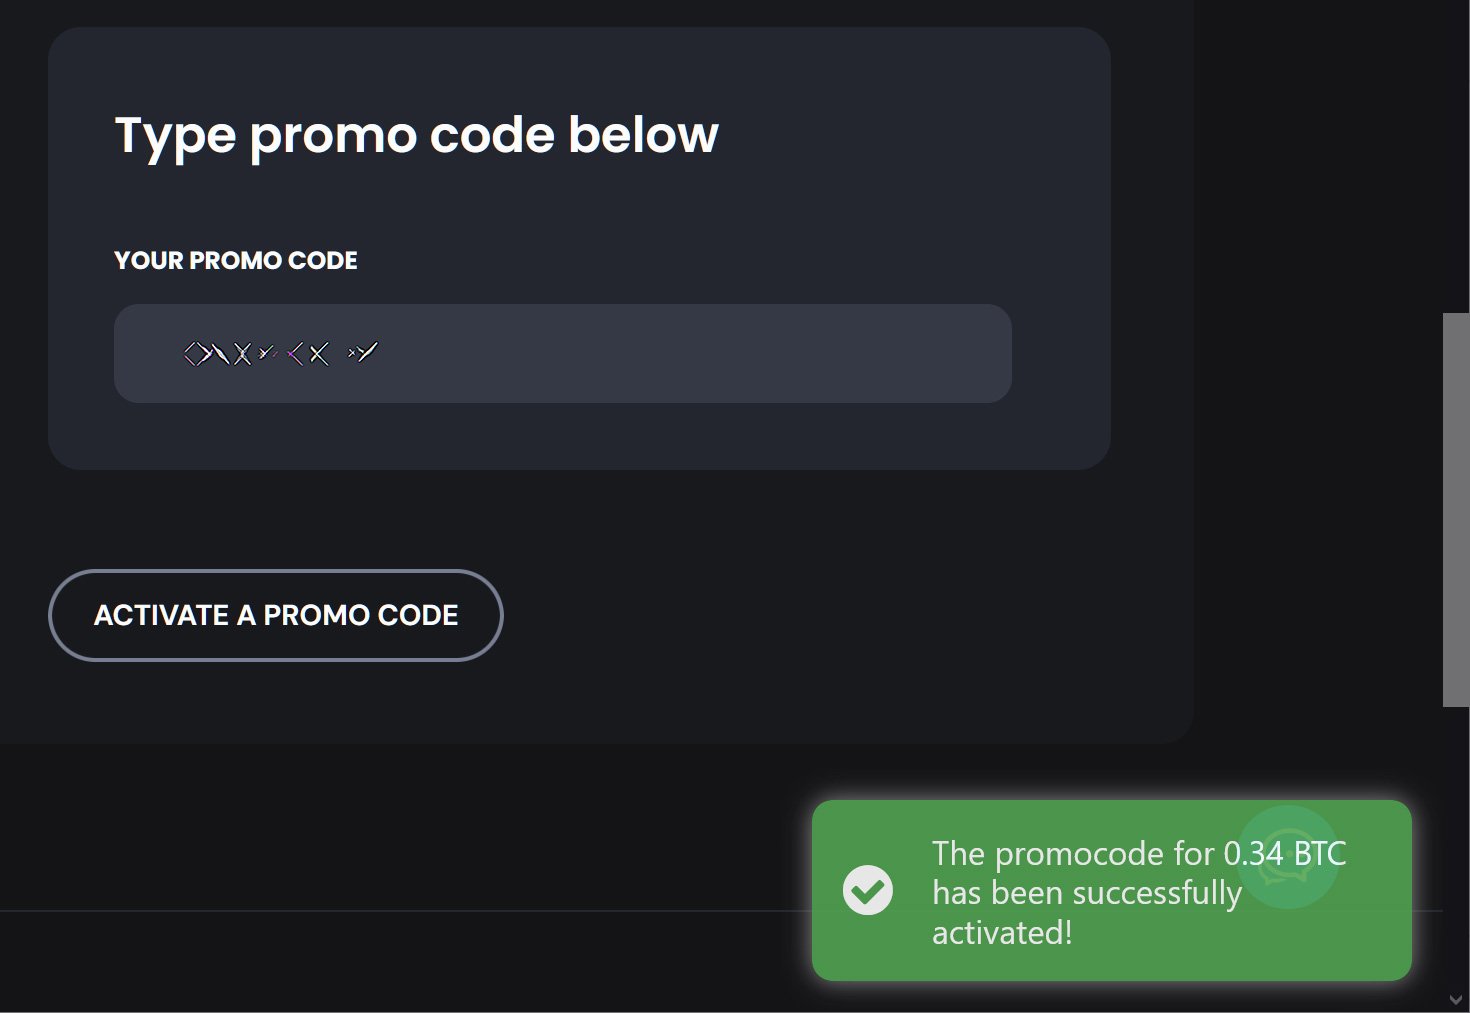 Promo code allegedly adding 0.34 BTC to a wallet